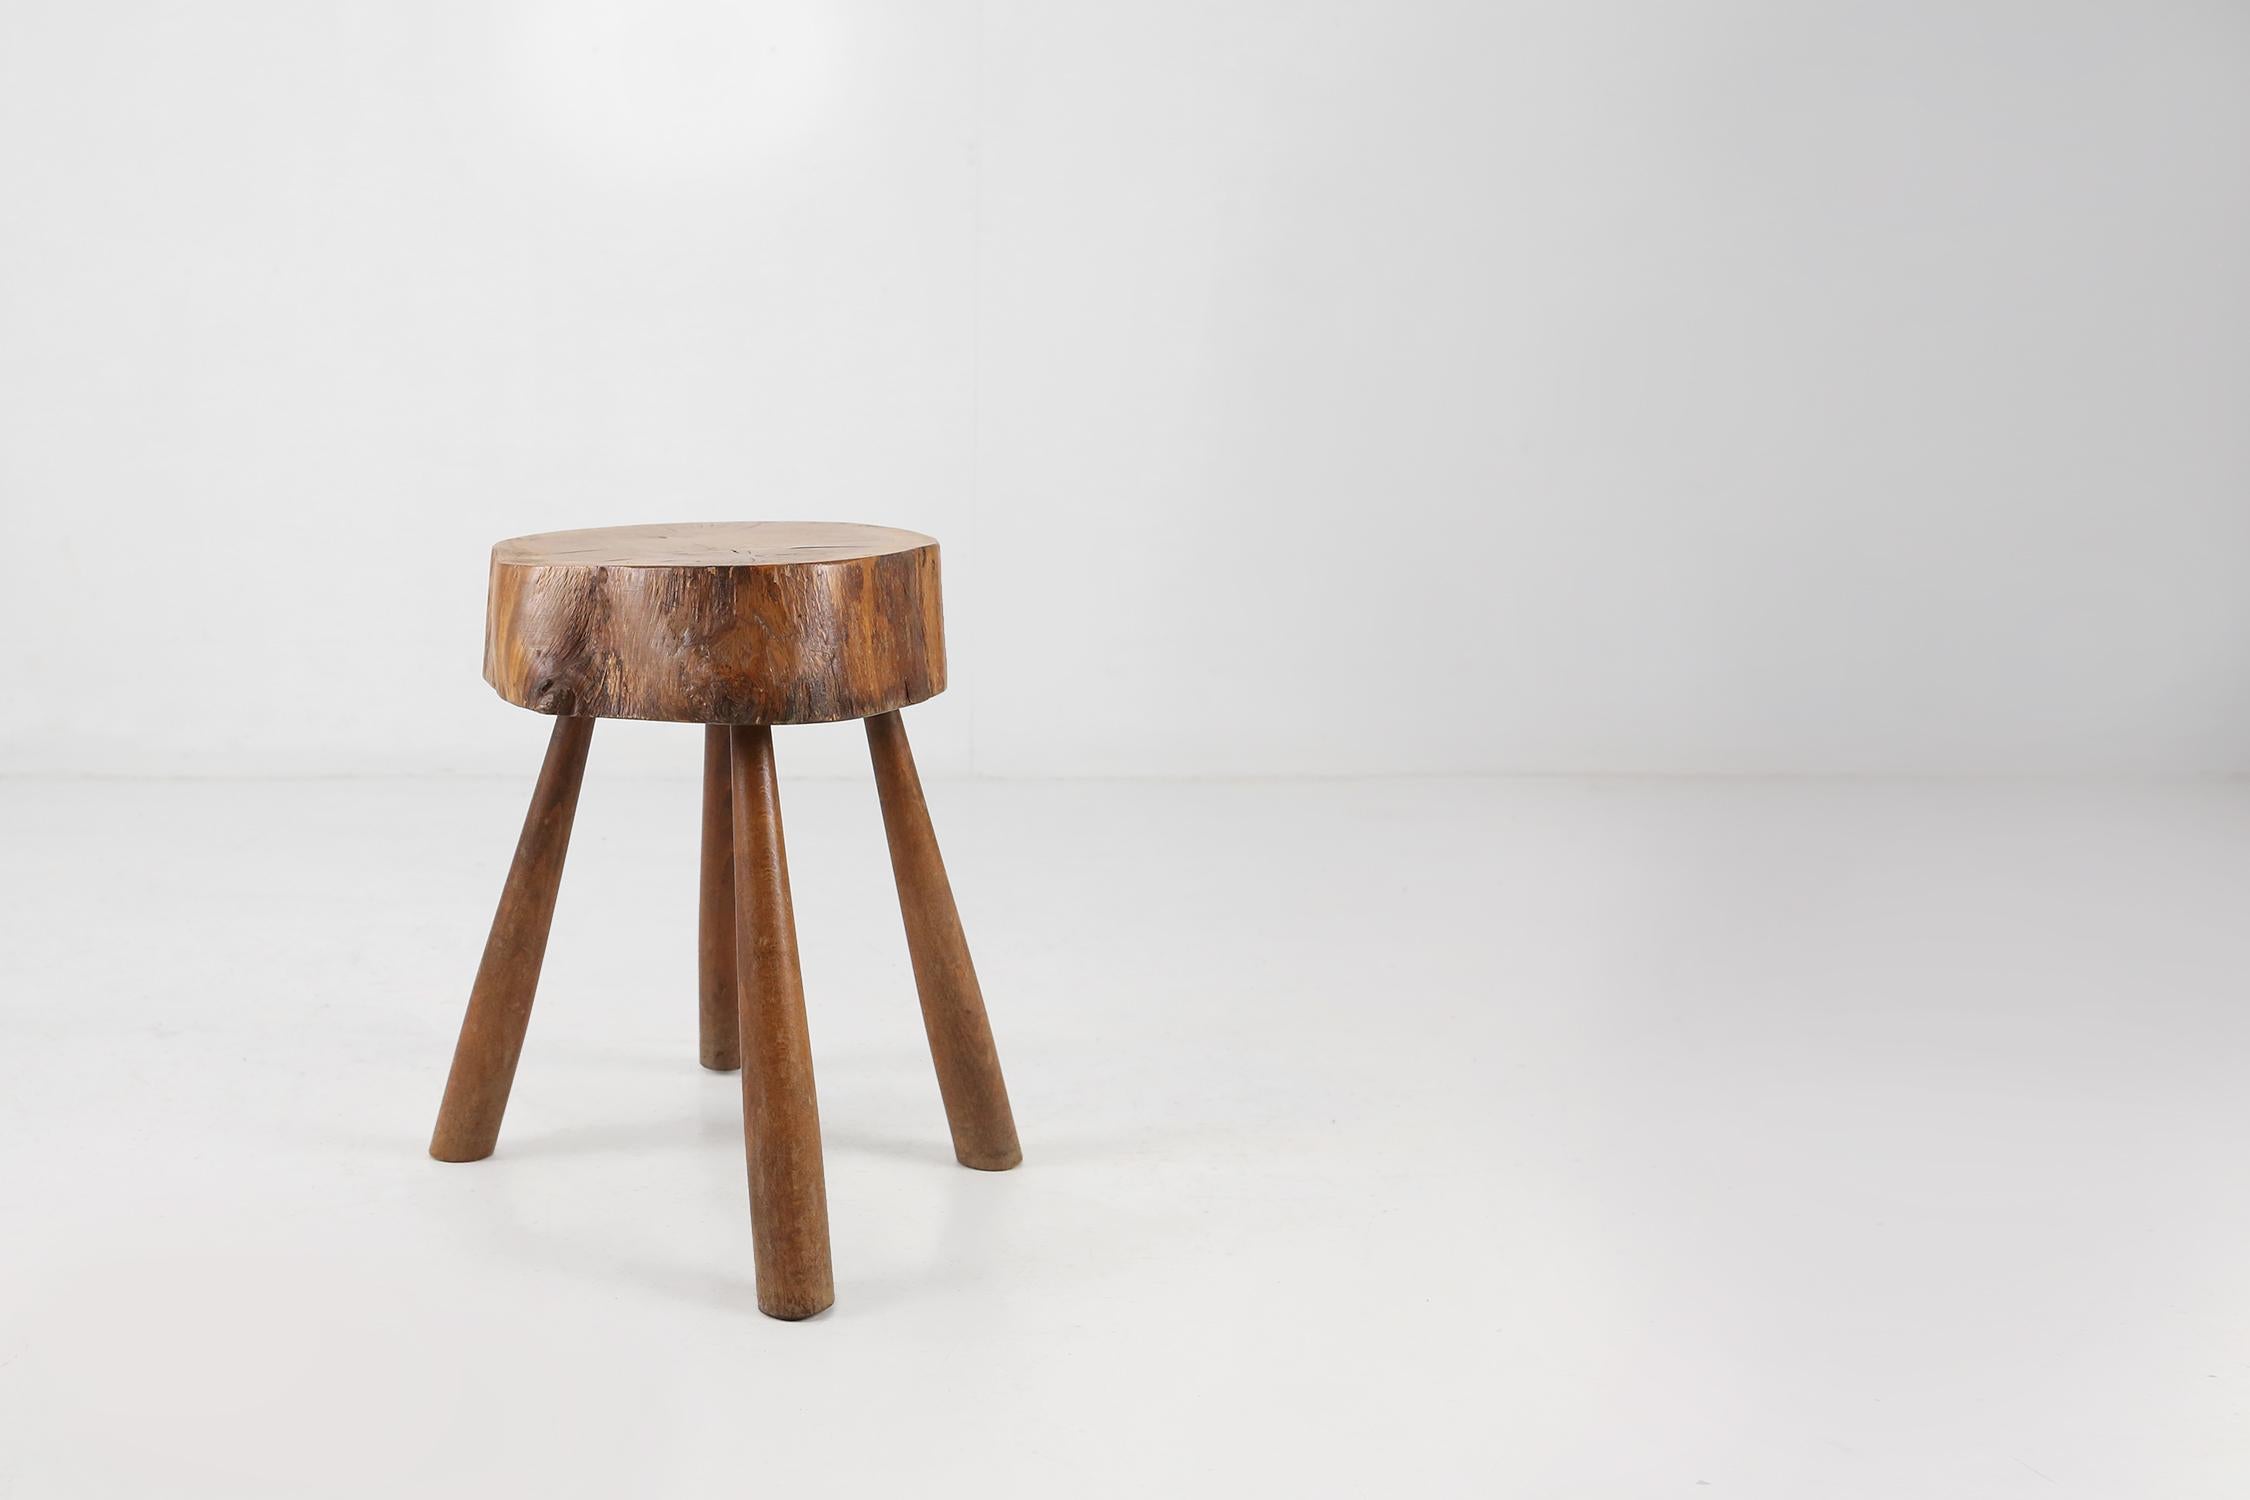 French Solid Wooden Rustic Stool, 1920's